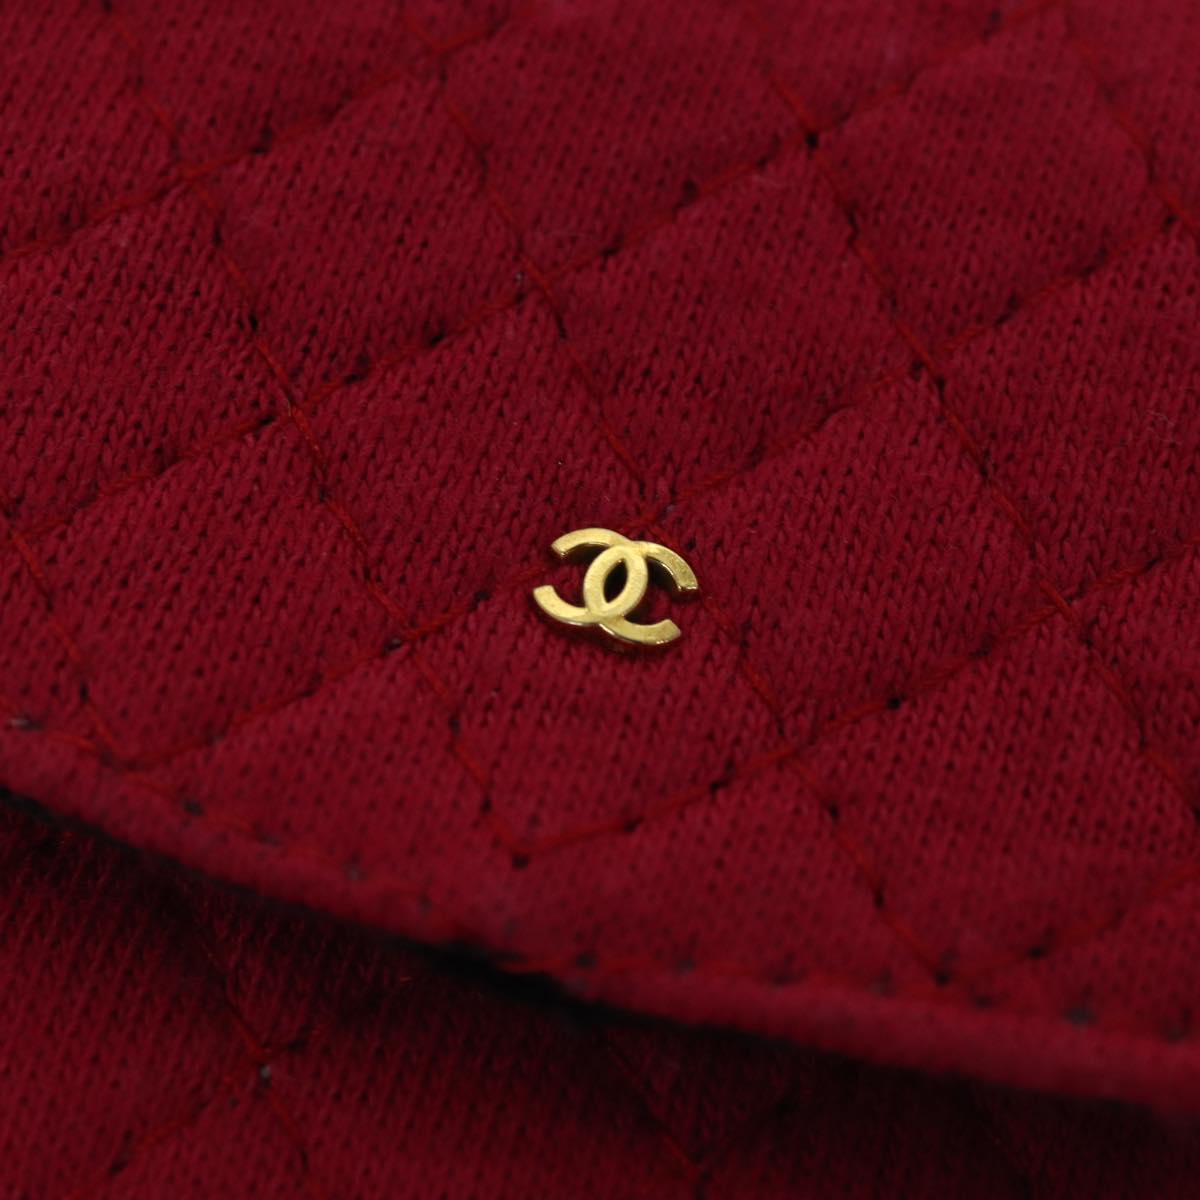 CHANEL Matelasse Chain Pouch cotton Red CC Auth bs13334